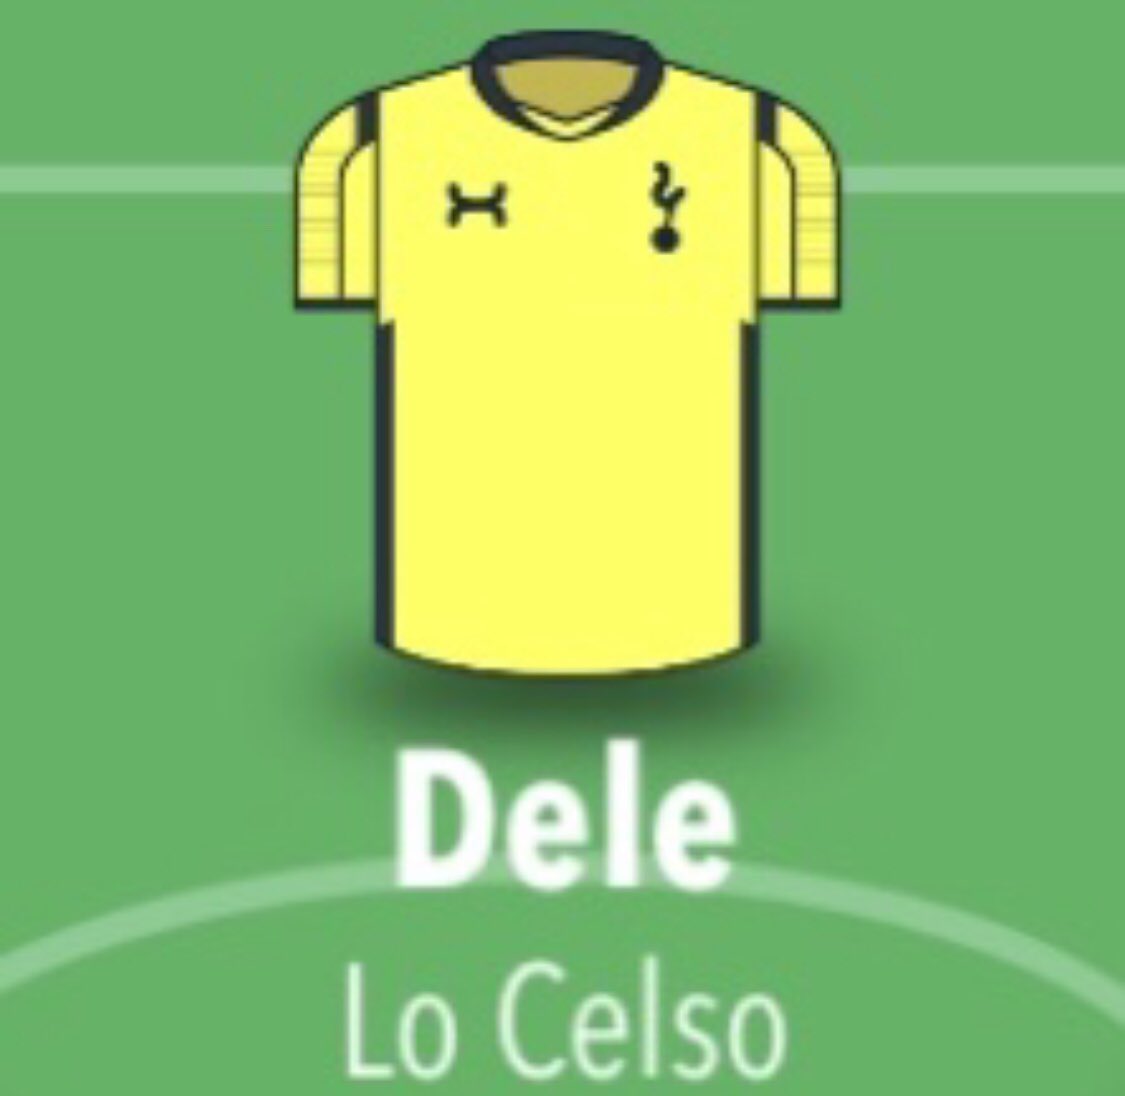 AM -•Dele - Starter (4-2-3-1)•Lo Celso - Starter (4-3-3)If Dele can find his form of 2/3 seasons ago then we’re eating good but the No.10 is kinda going out of style so he might have to be an attacking CM like Gio. Speaking of GLC is can’t to see him Ndombele and a DM 